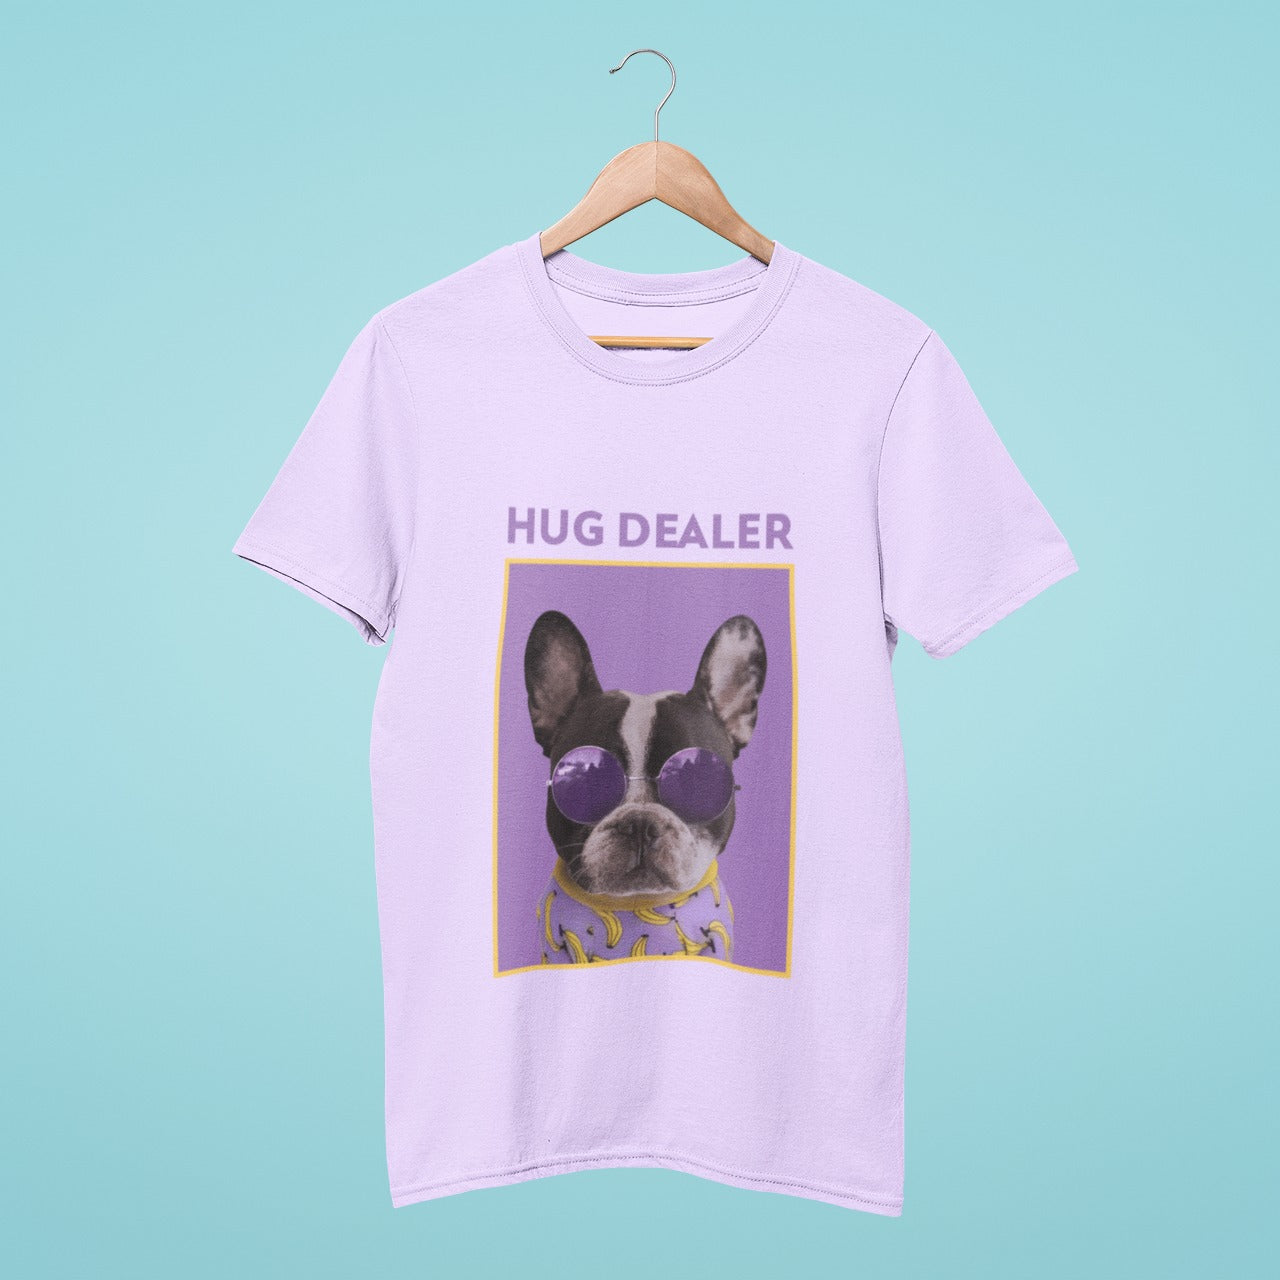 Introducing our "Hug Dealer" lavender t-shirt featuring a cool French bulldog wearing purple sunglasses. This cute and stylish tee is perfect for all dog lovers who want to spread some love and joy. Made from high-quality material, it ensures comfort and durability. Get yours today and become a hug dealer too!